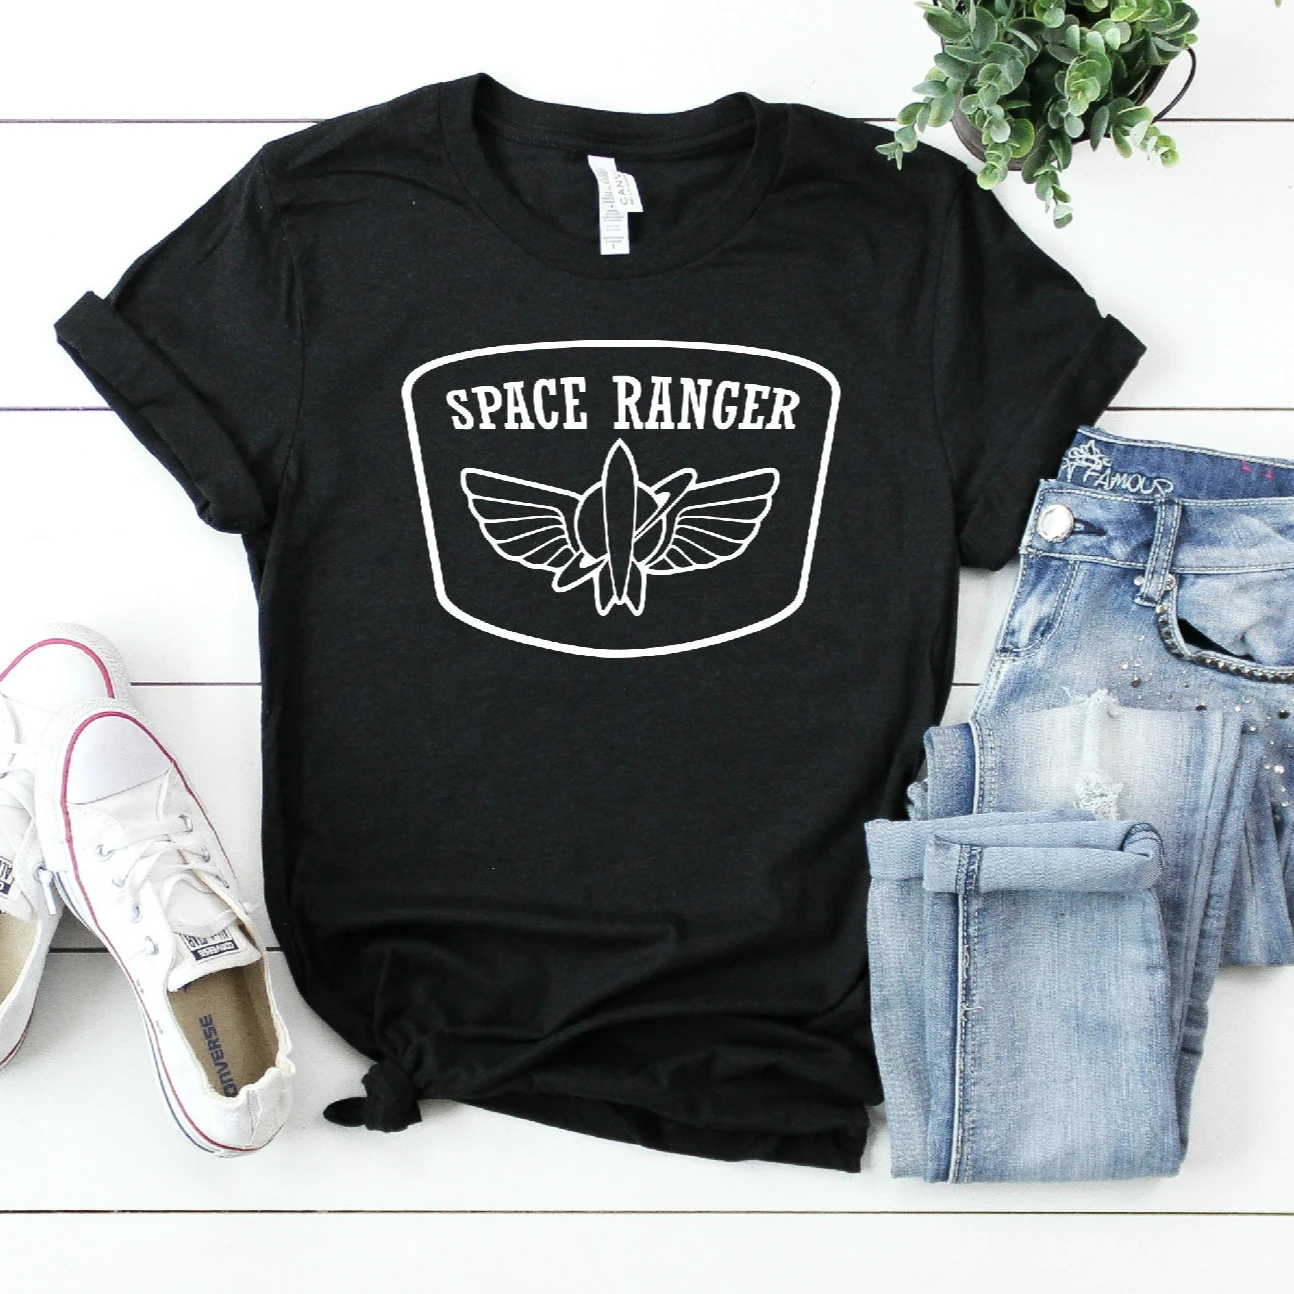 

2020 Space Ranger T-shirt Movie Inspired Space Ranger Shirt Buzz Lightyear Shirt Funny Graphic Tees Tumblr Tops